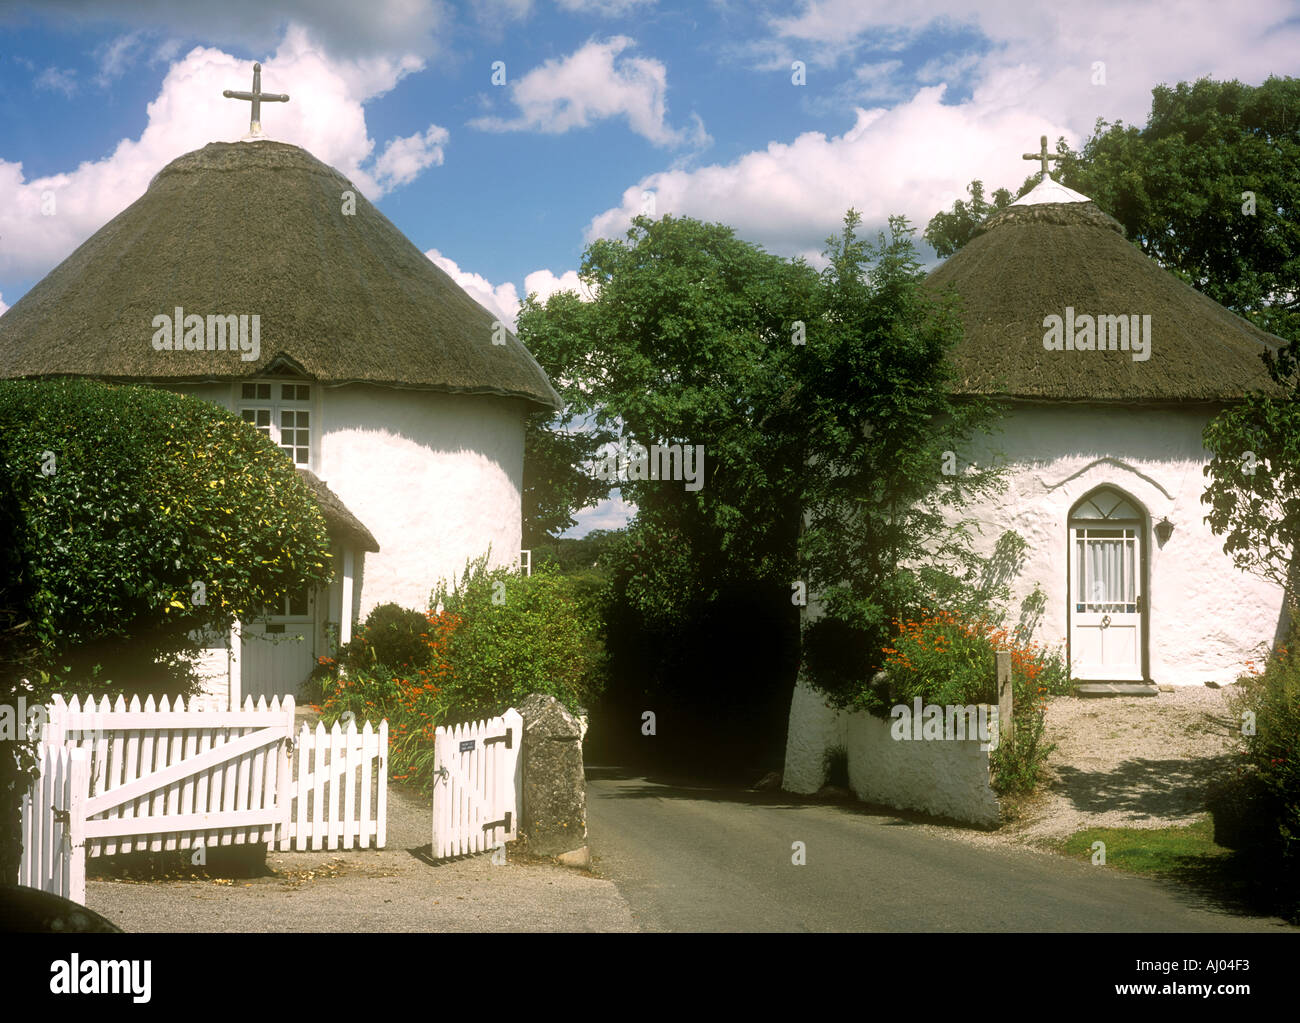 The famous thatched round houses in the village of Veryan on the Roseland Peninsula in Cornwall in the UK Stock Photo